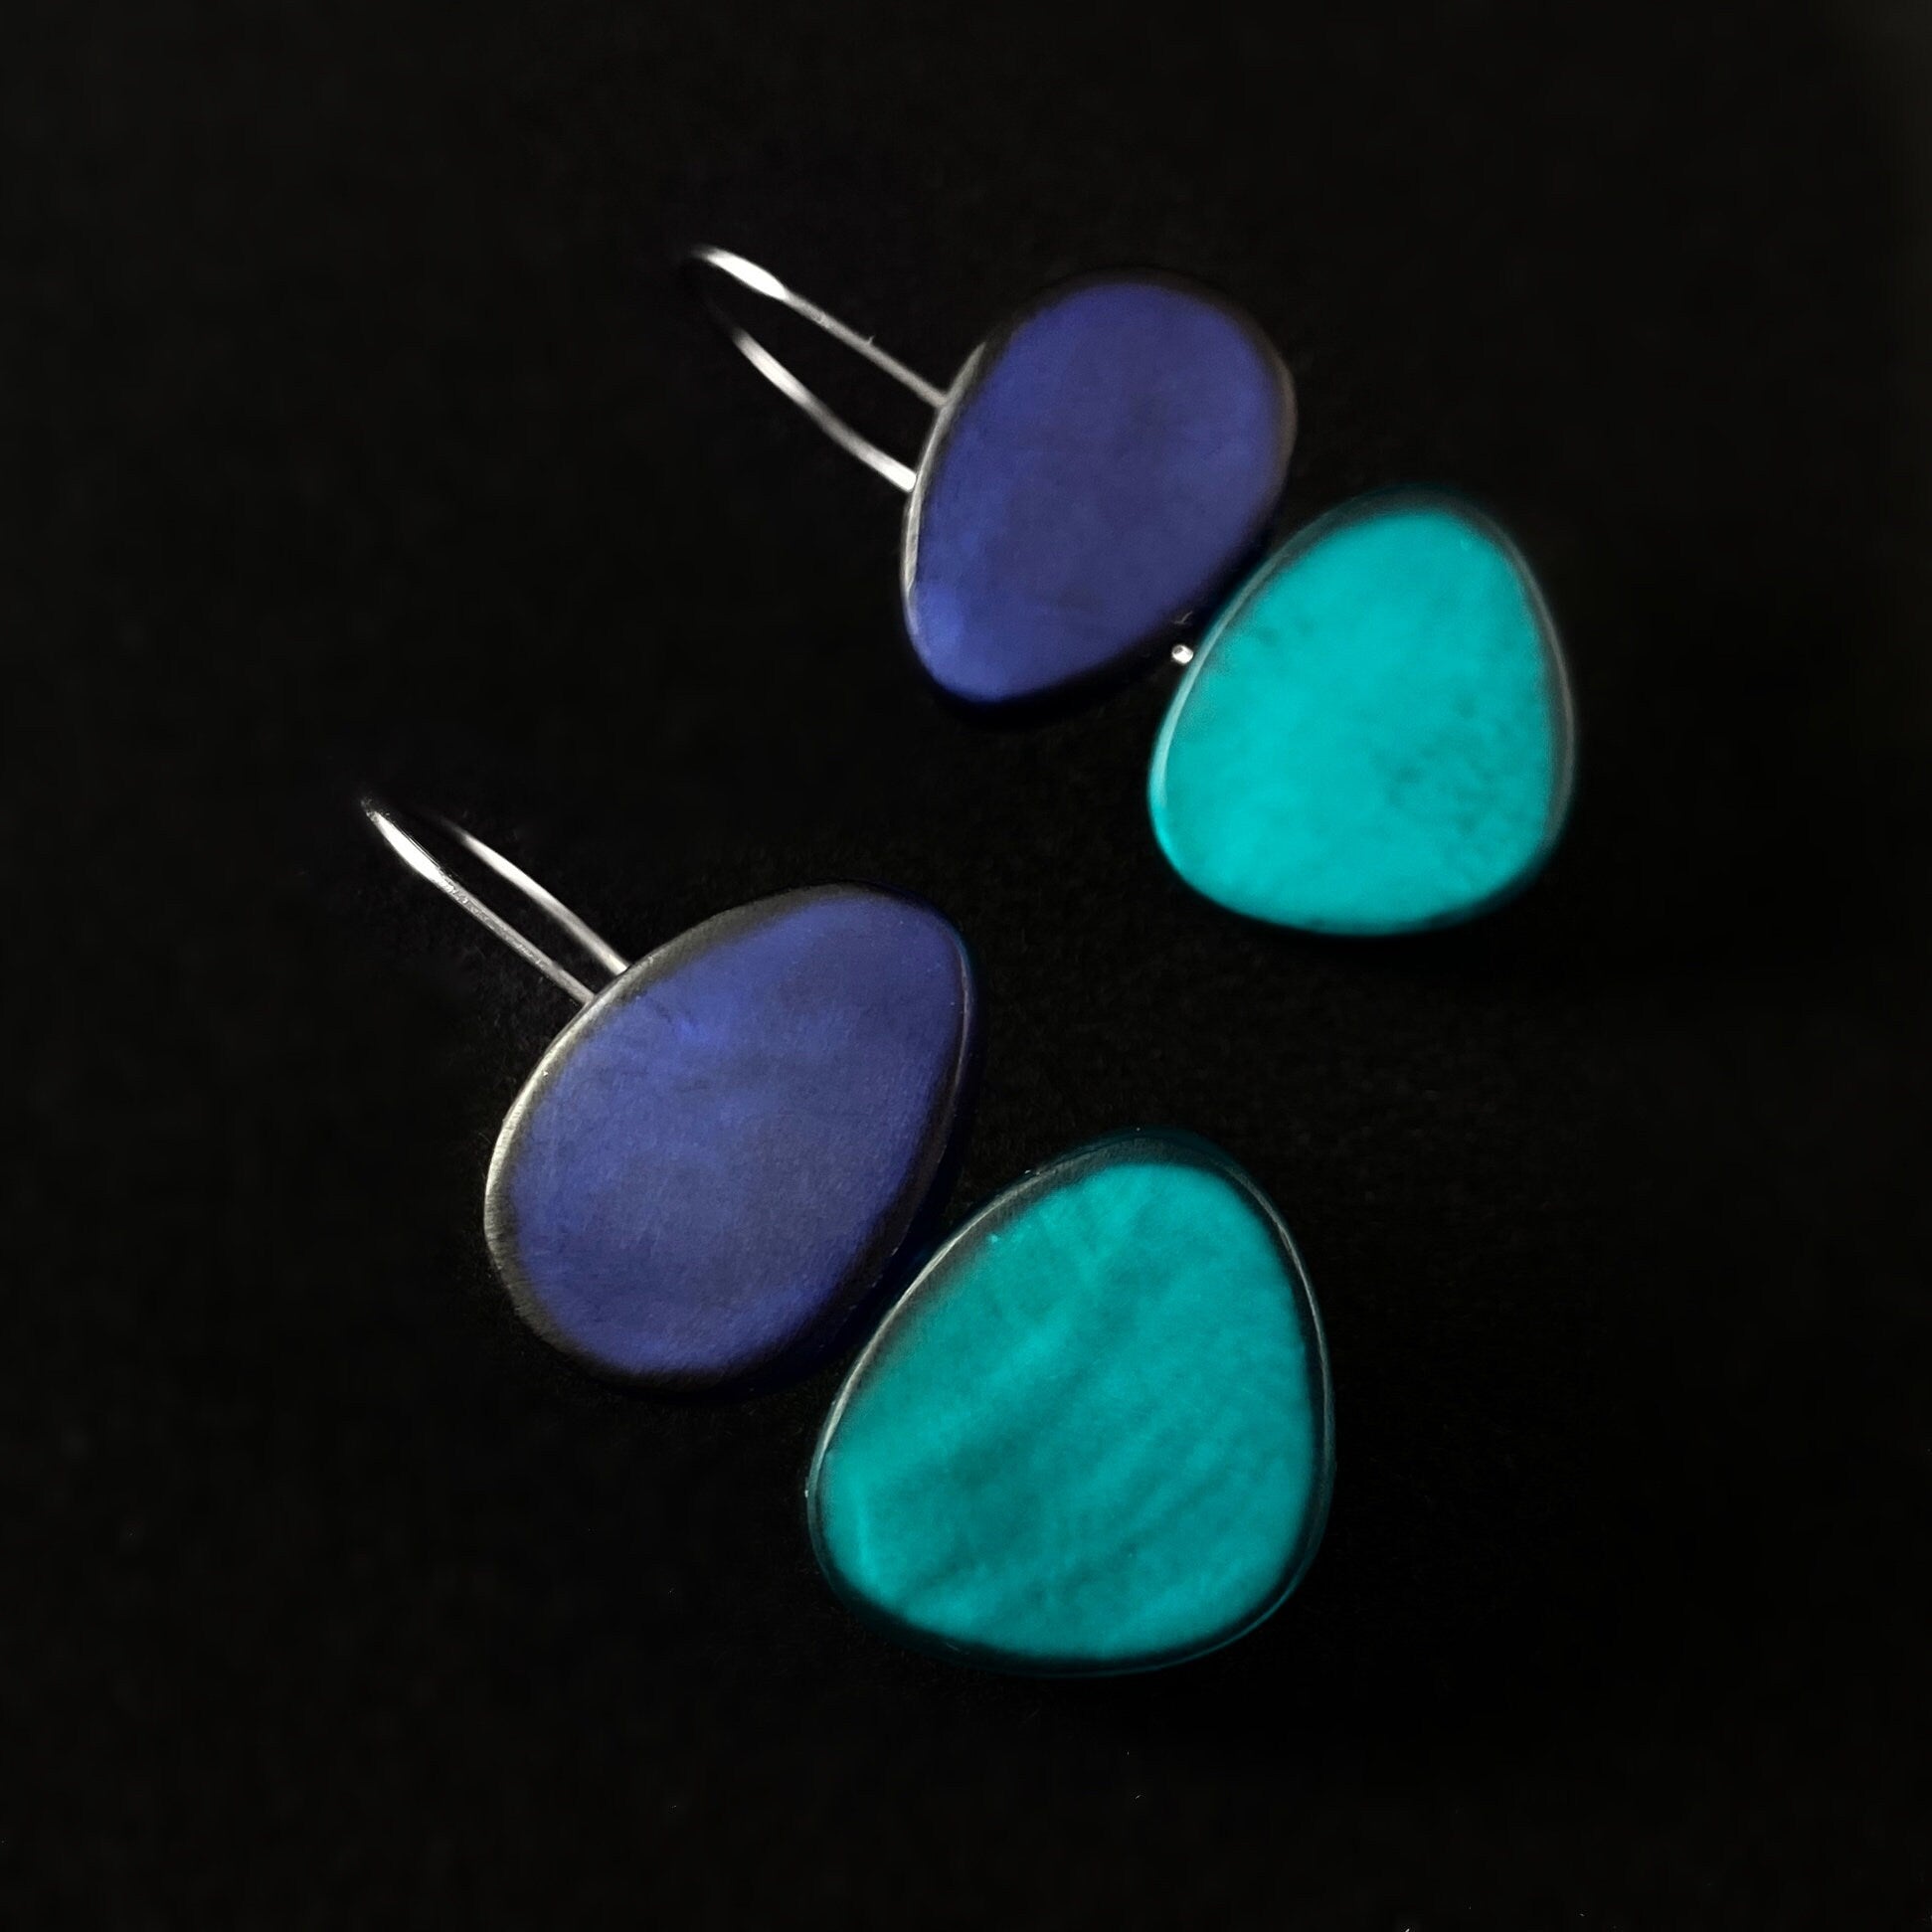 Handmade Resin and Shell Two Tone Turquoise/Sapphire Blue Stacked Earrings, Hypoallergenic - Origin